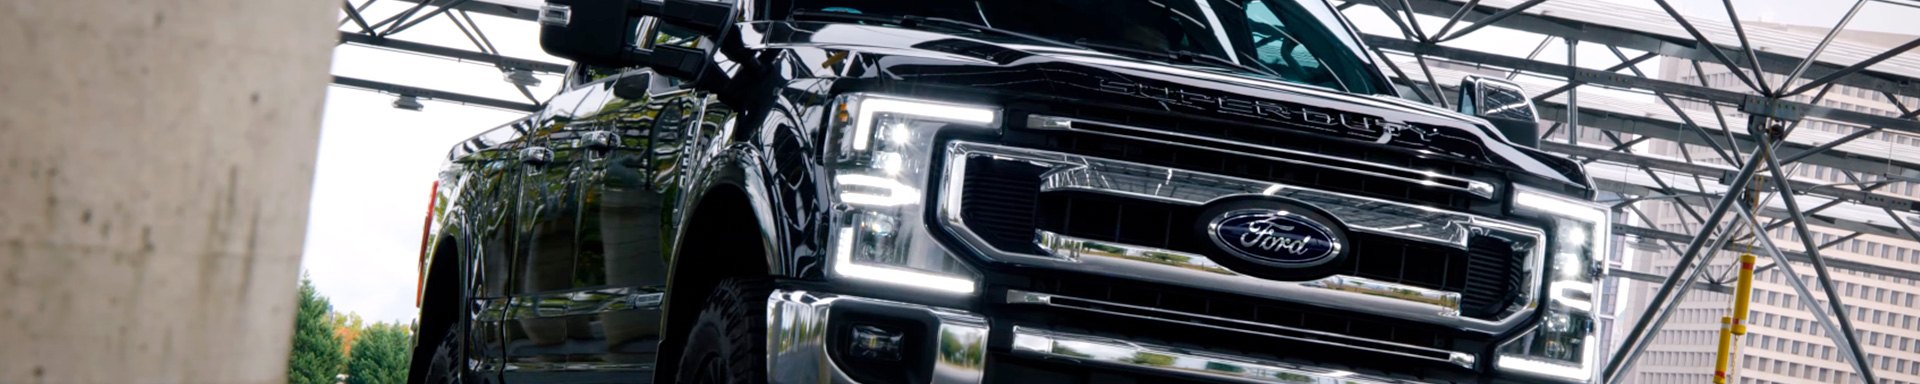 New Addition To Morimoto Product Line - 2020-2021 Ford Super Duty XB LED Headlights